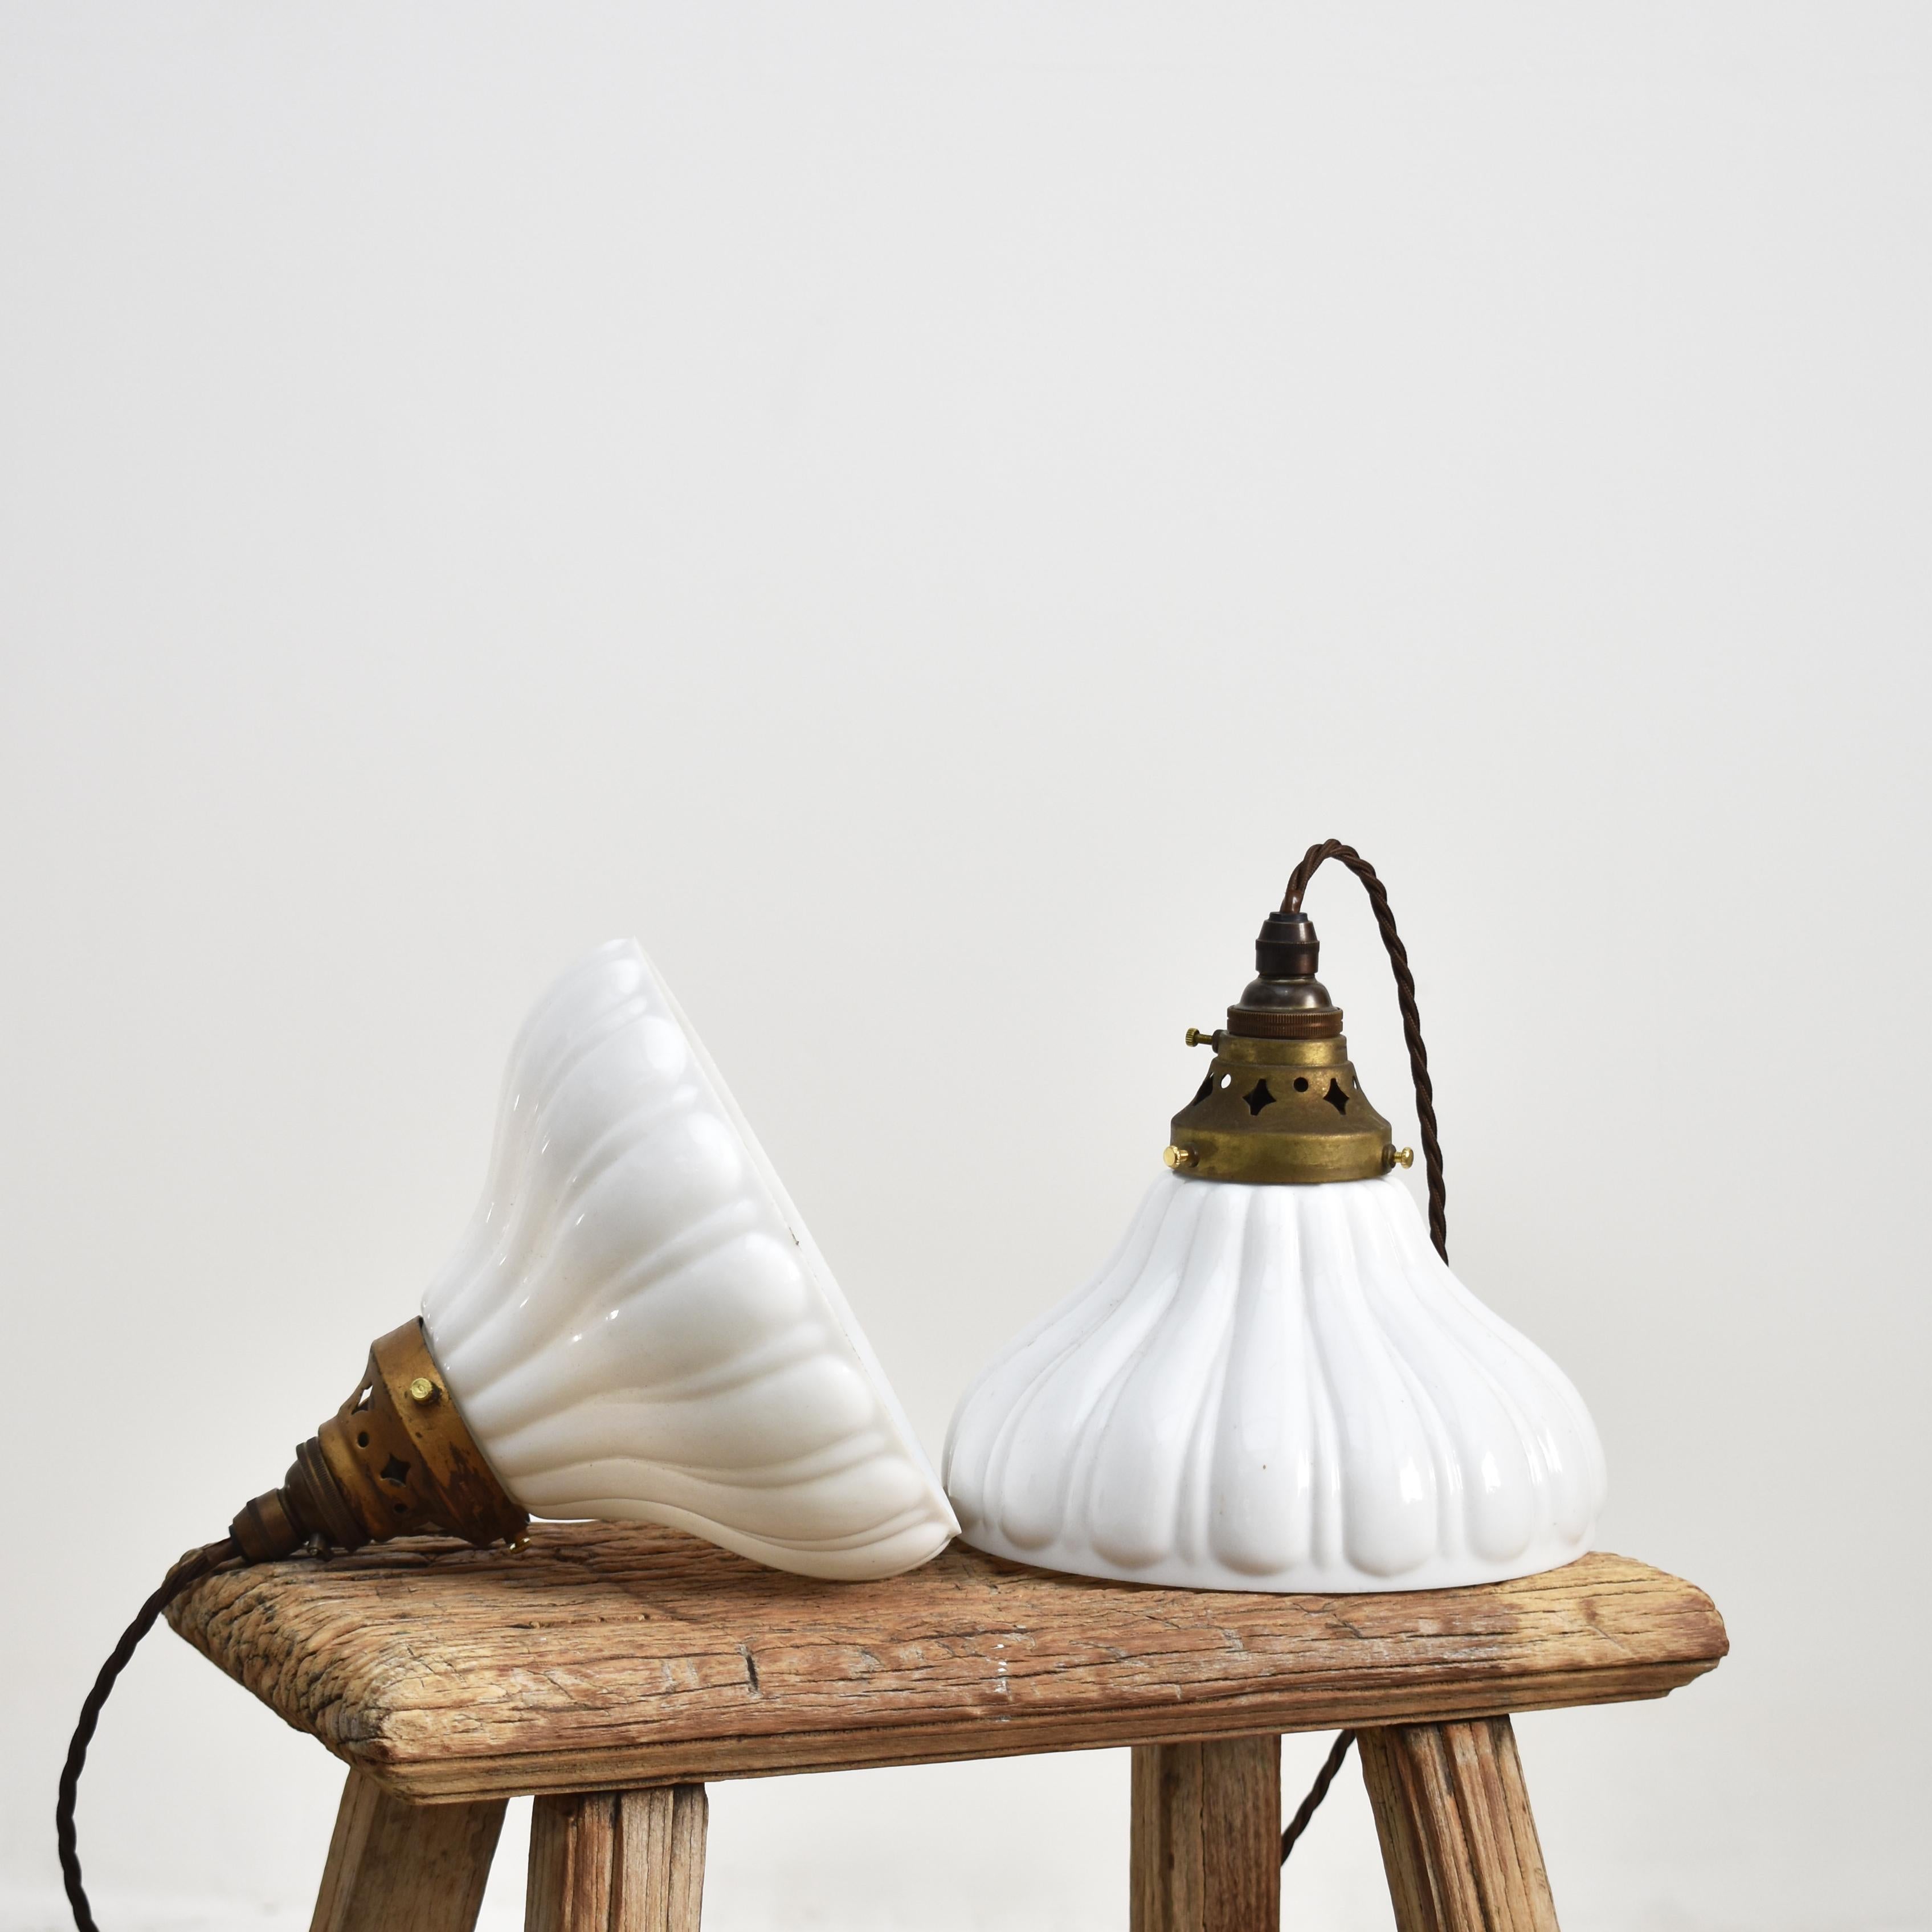 Pair Of Antique Milk Glass Holophane Pendant Lights – D

A pair of antique pendant milk glass lights salvaged from a chapel. The lights have retained their original brass galleries manufactured by ‘Holophane’. The shapely milk glass shades look